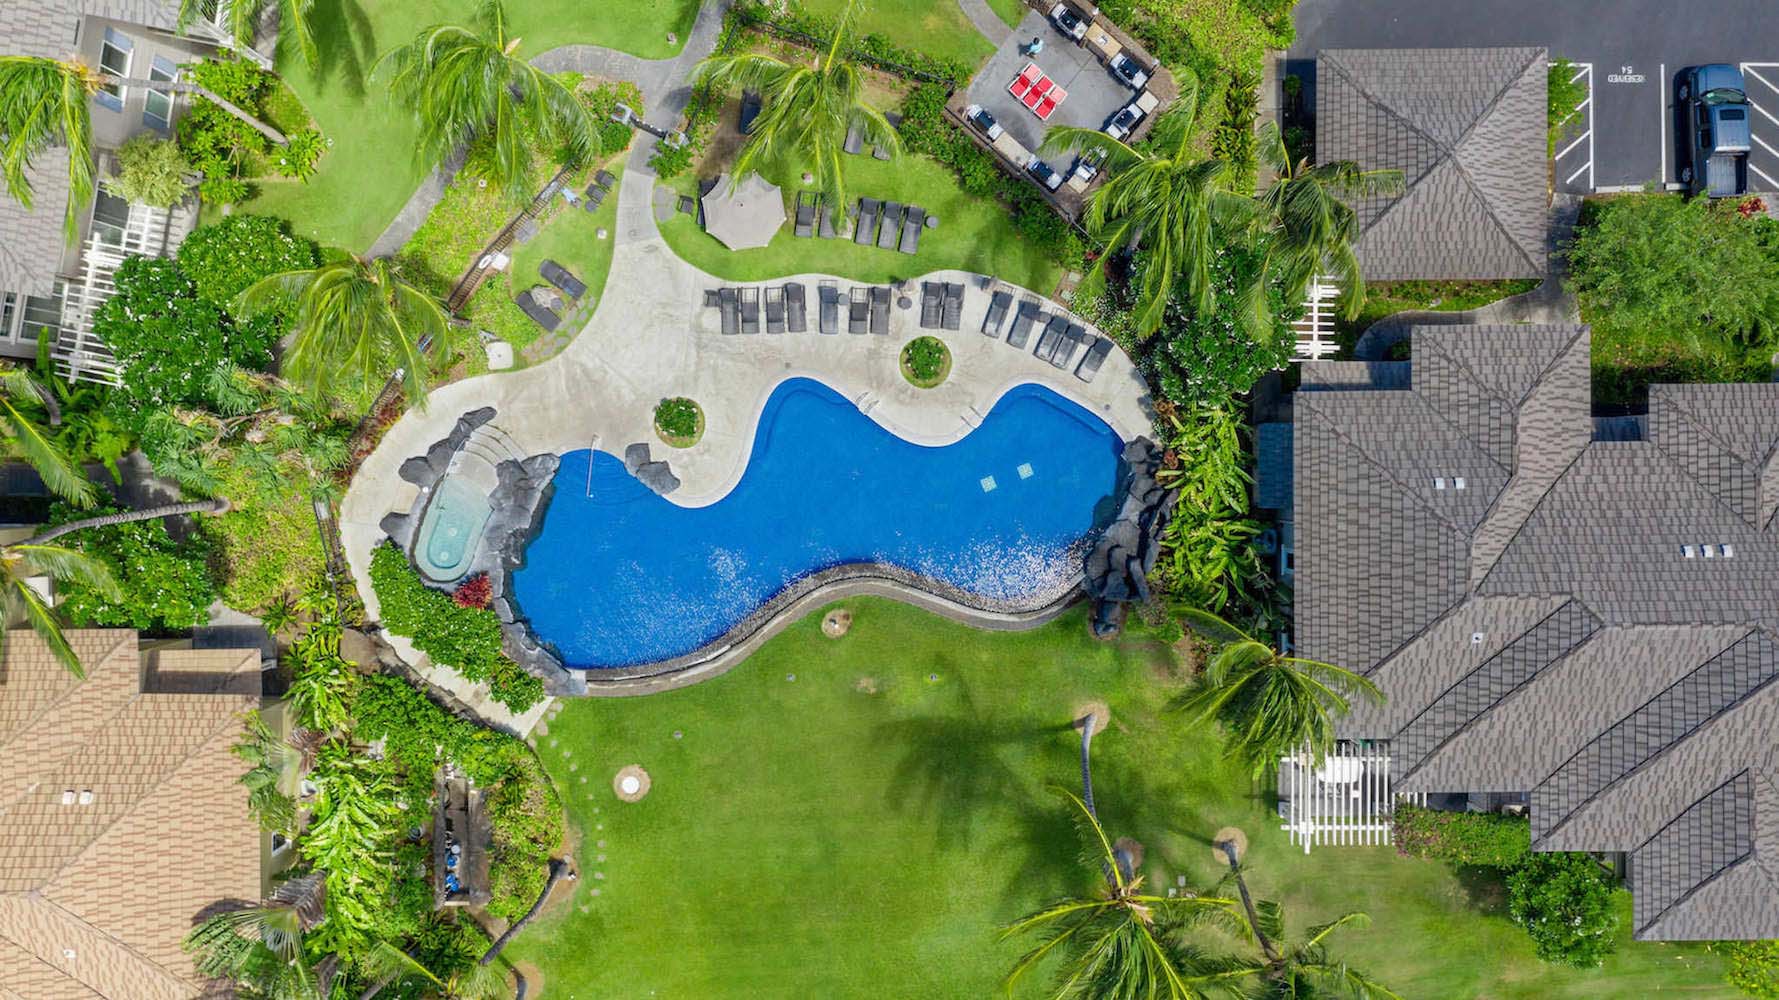 Aerial view of pool surrounded by foliage